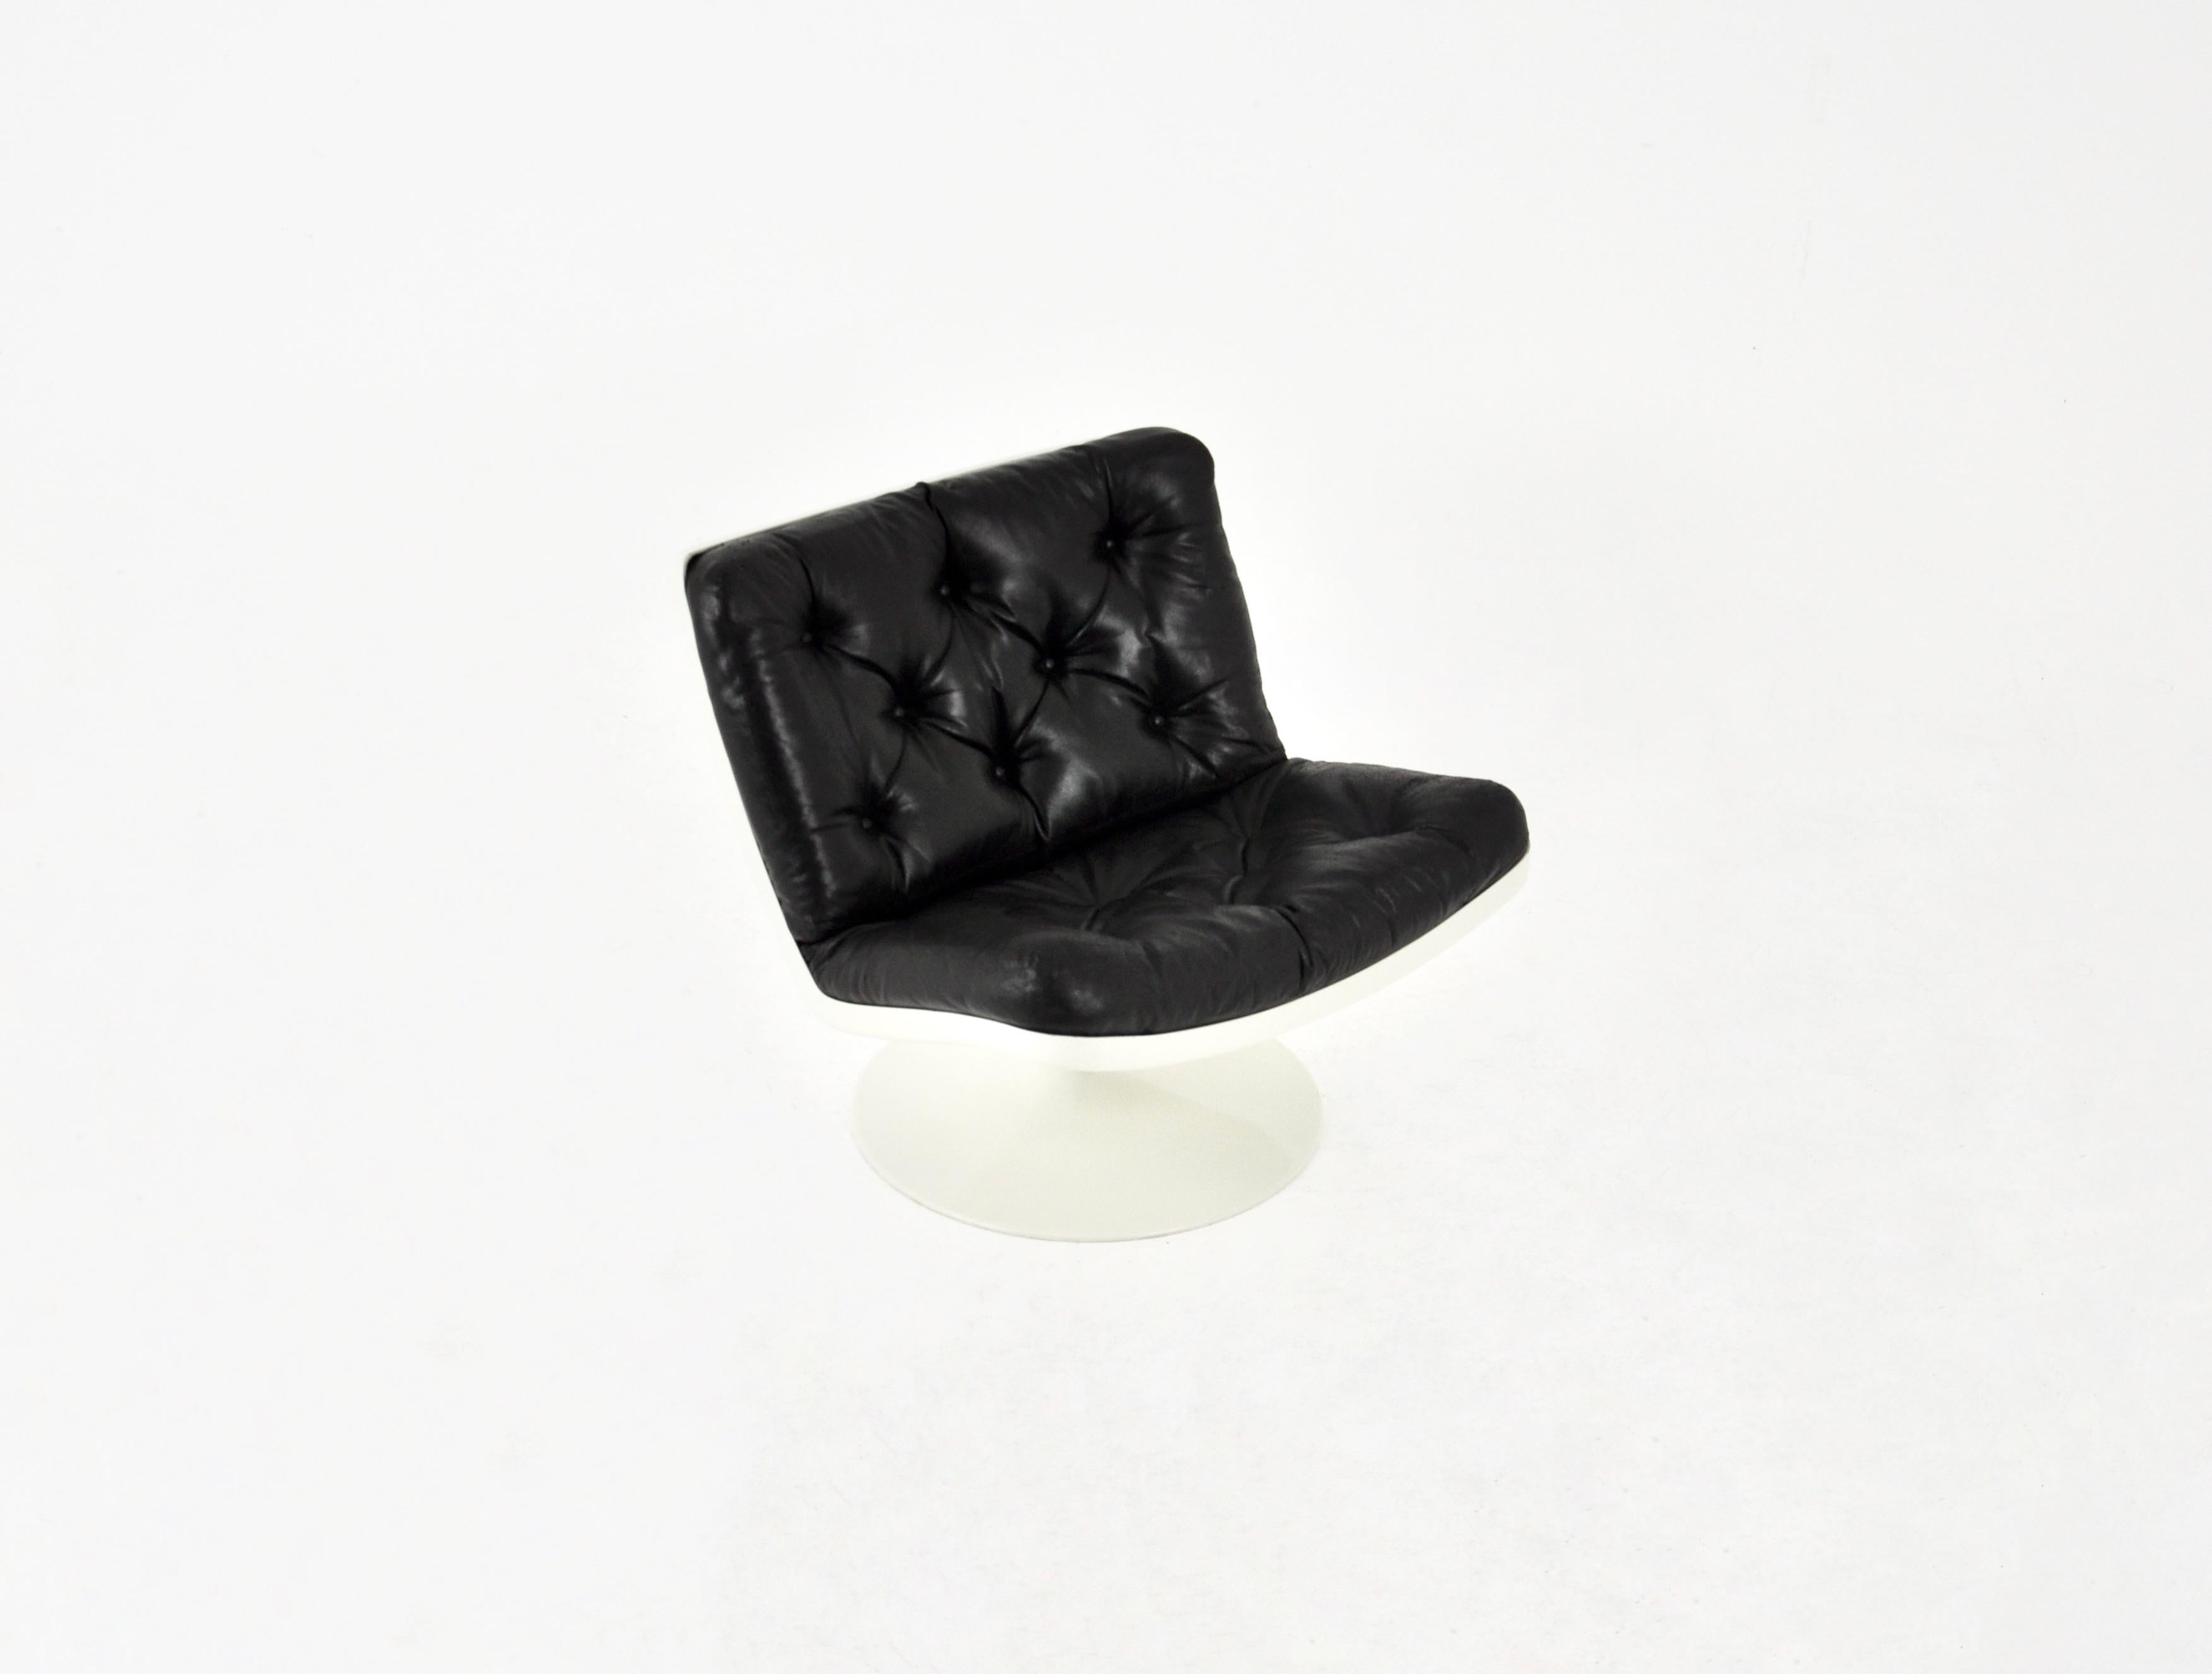 Swivel armchair in black leather and plastic shell. Seat height 43cm. Wear due to time and age.